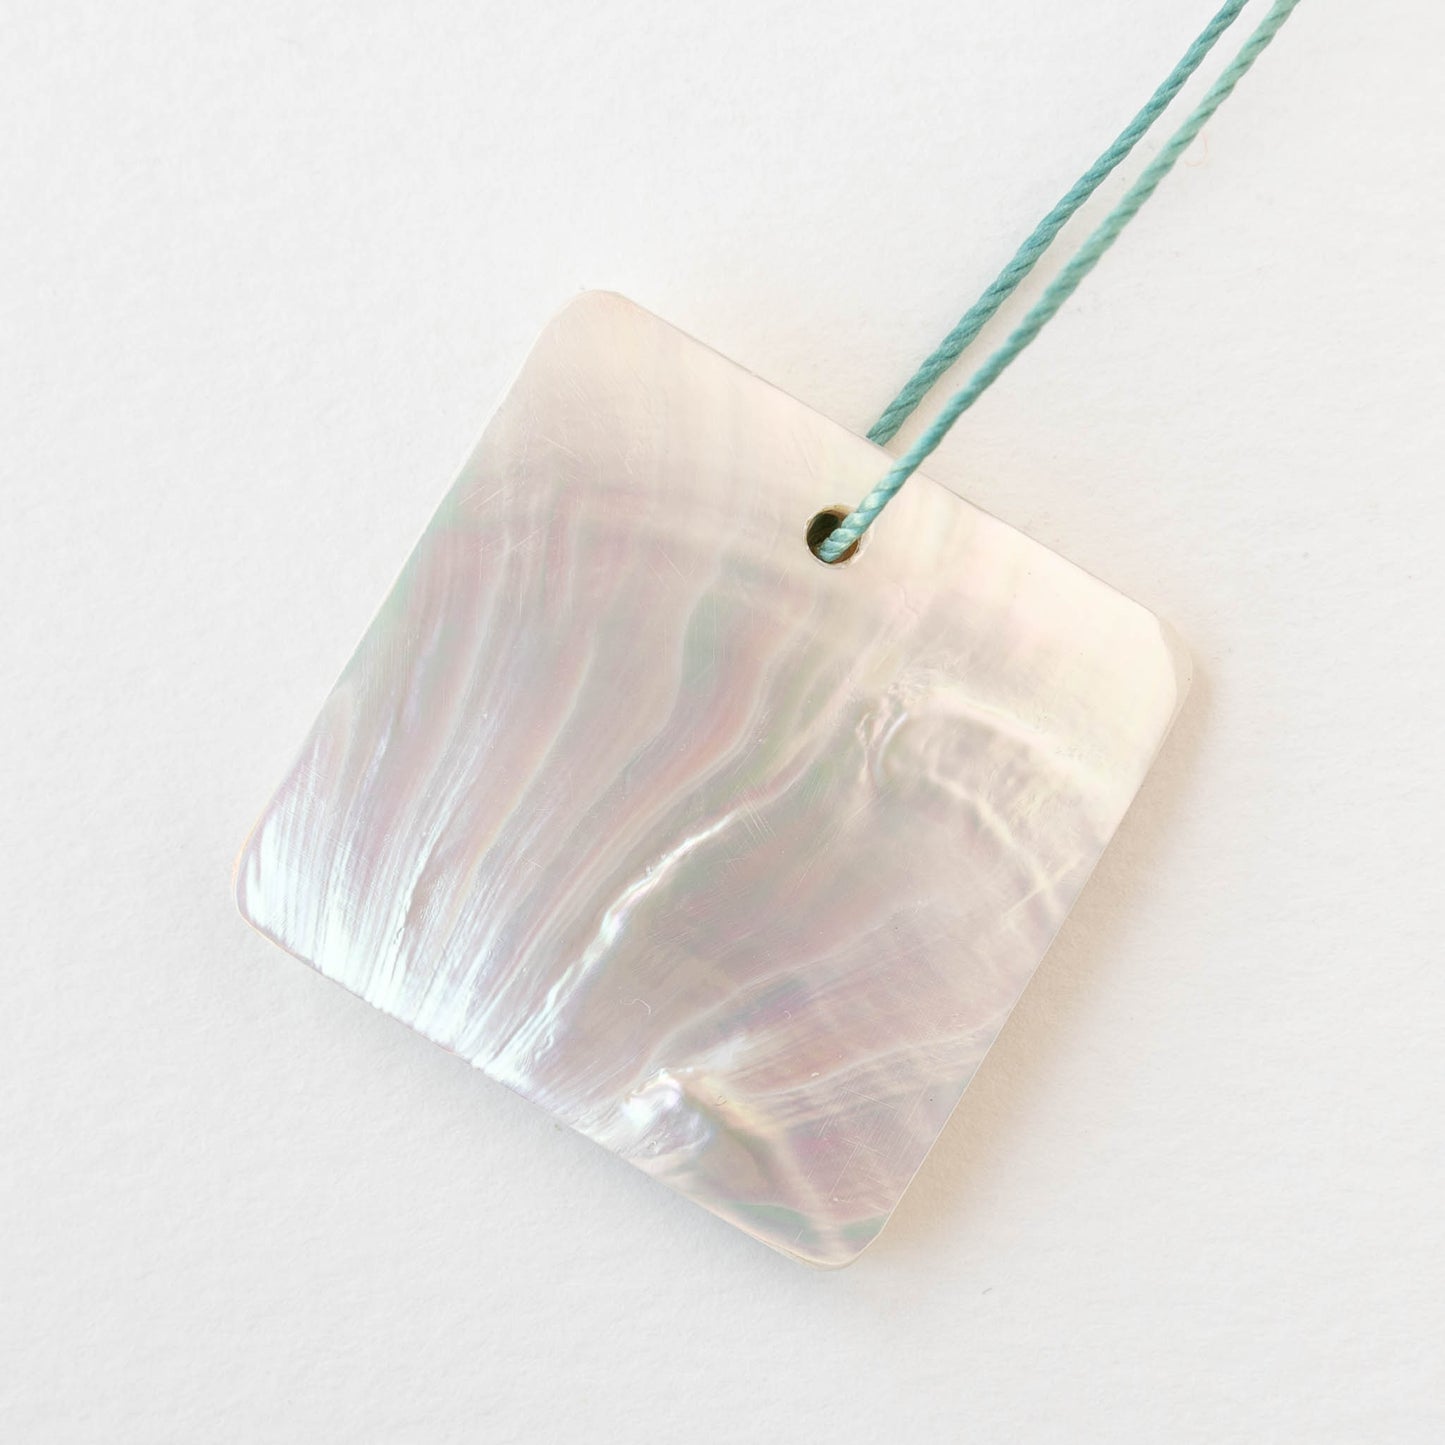 Mother of Pearl Square Pendant - 35mm Shell Teardrop Beads - 1 Piece